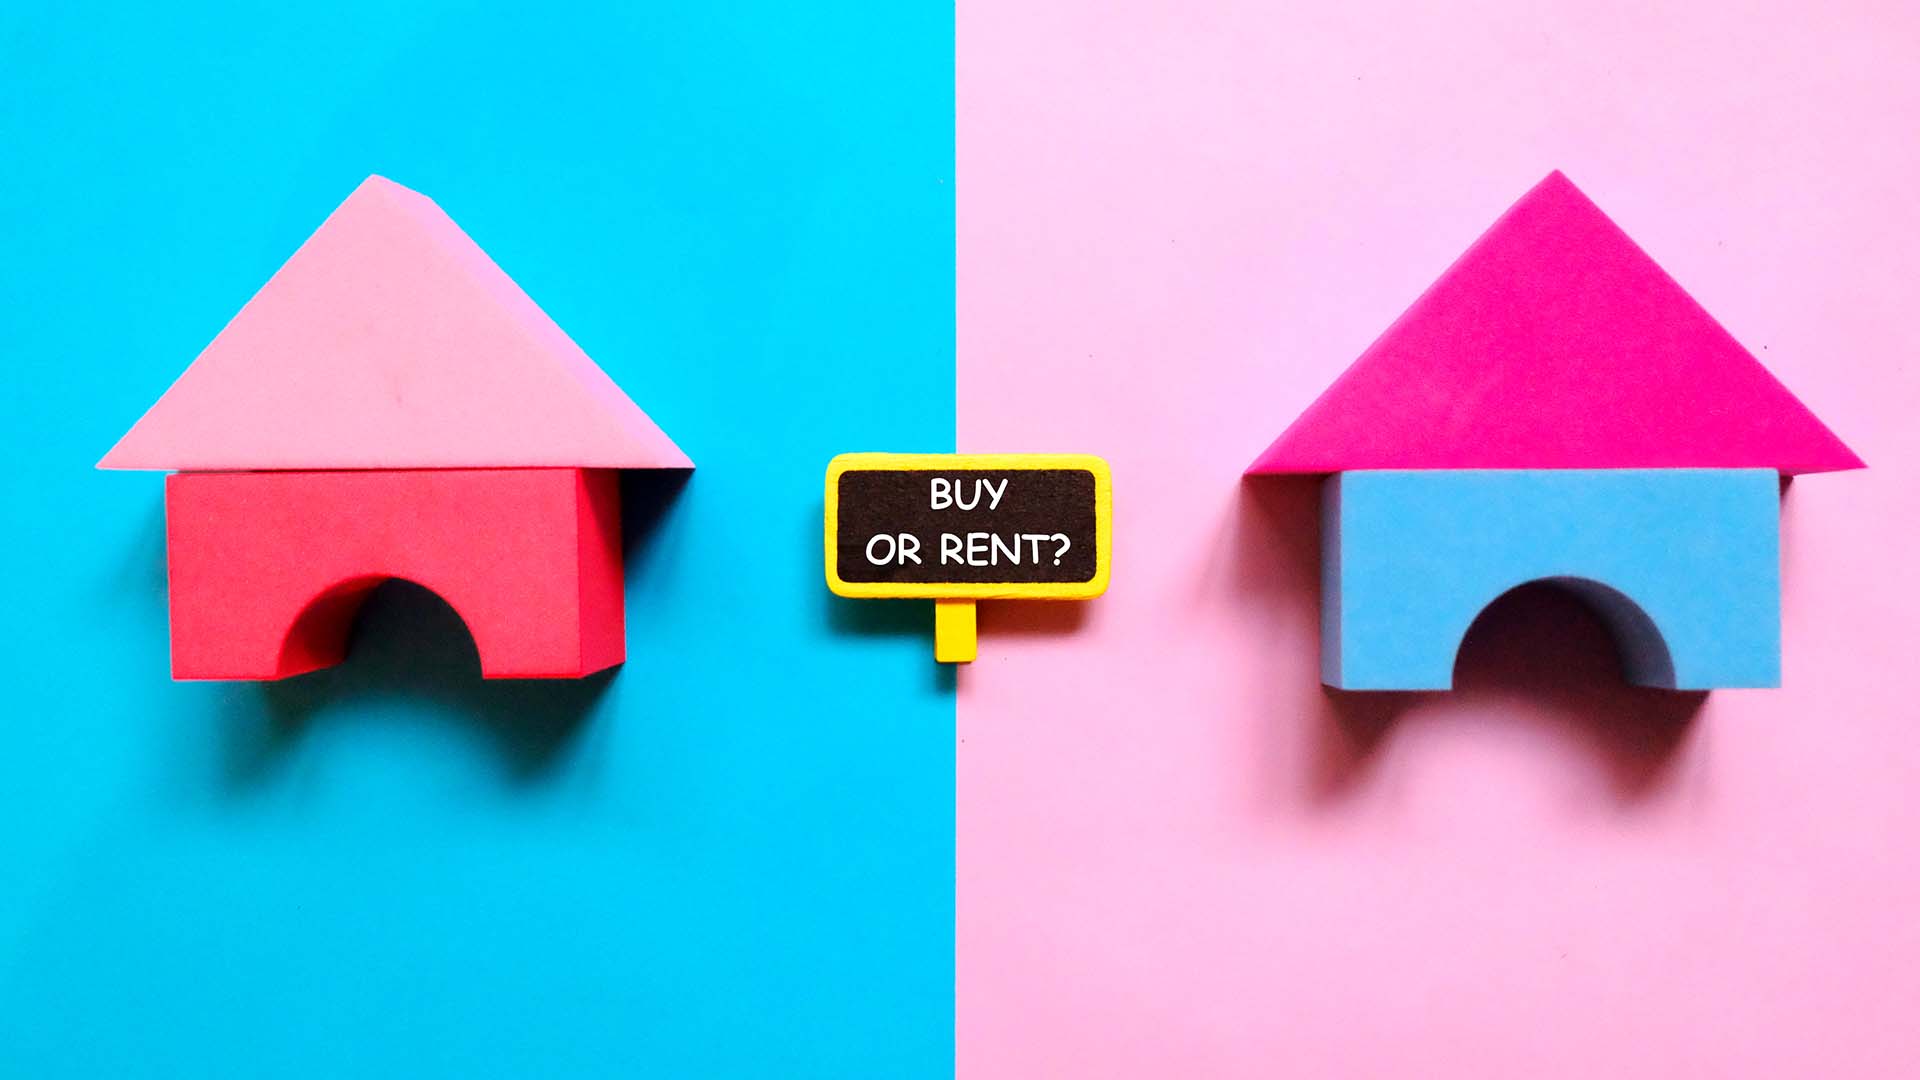 It’s cheaper to rent than to buy a home. Here’s advice for those weighing options